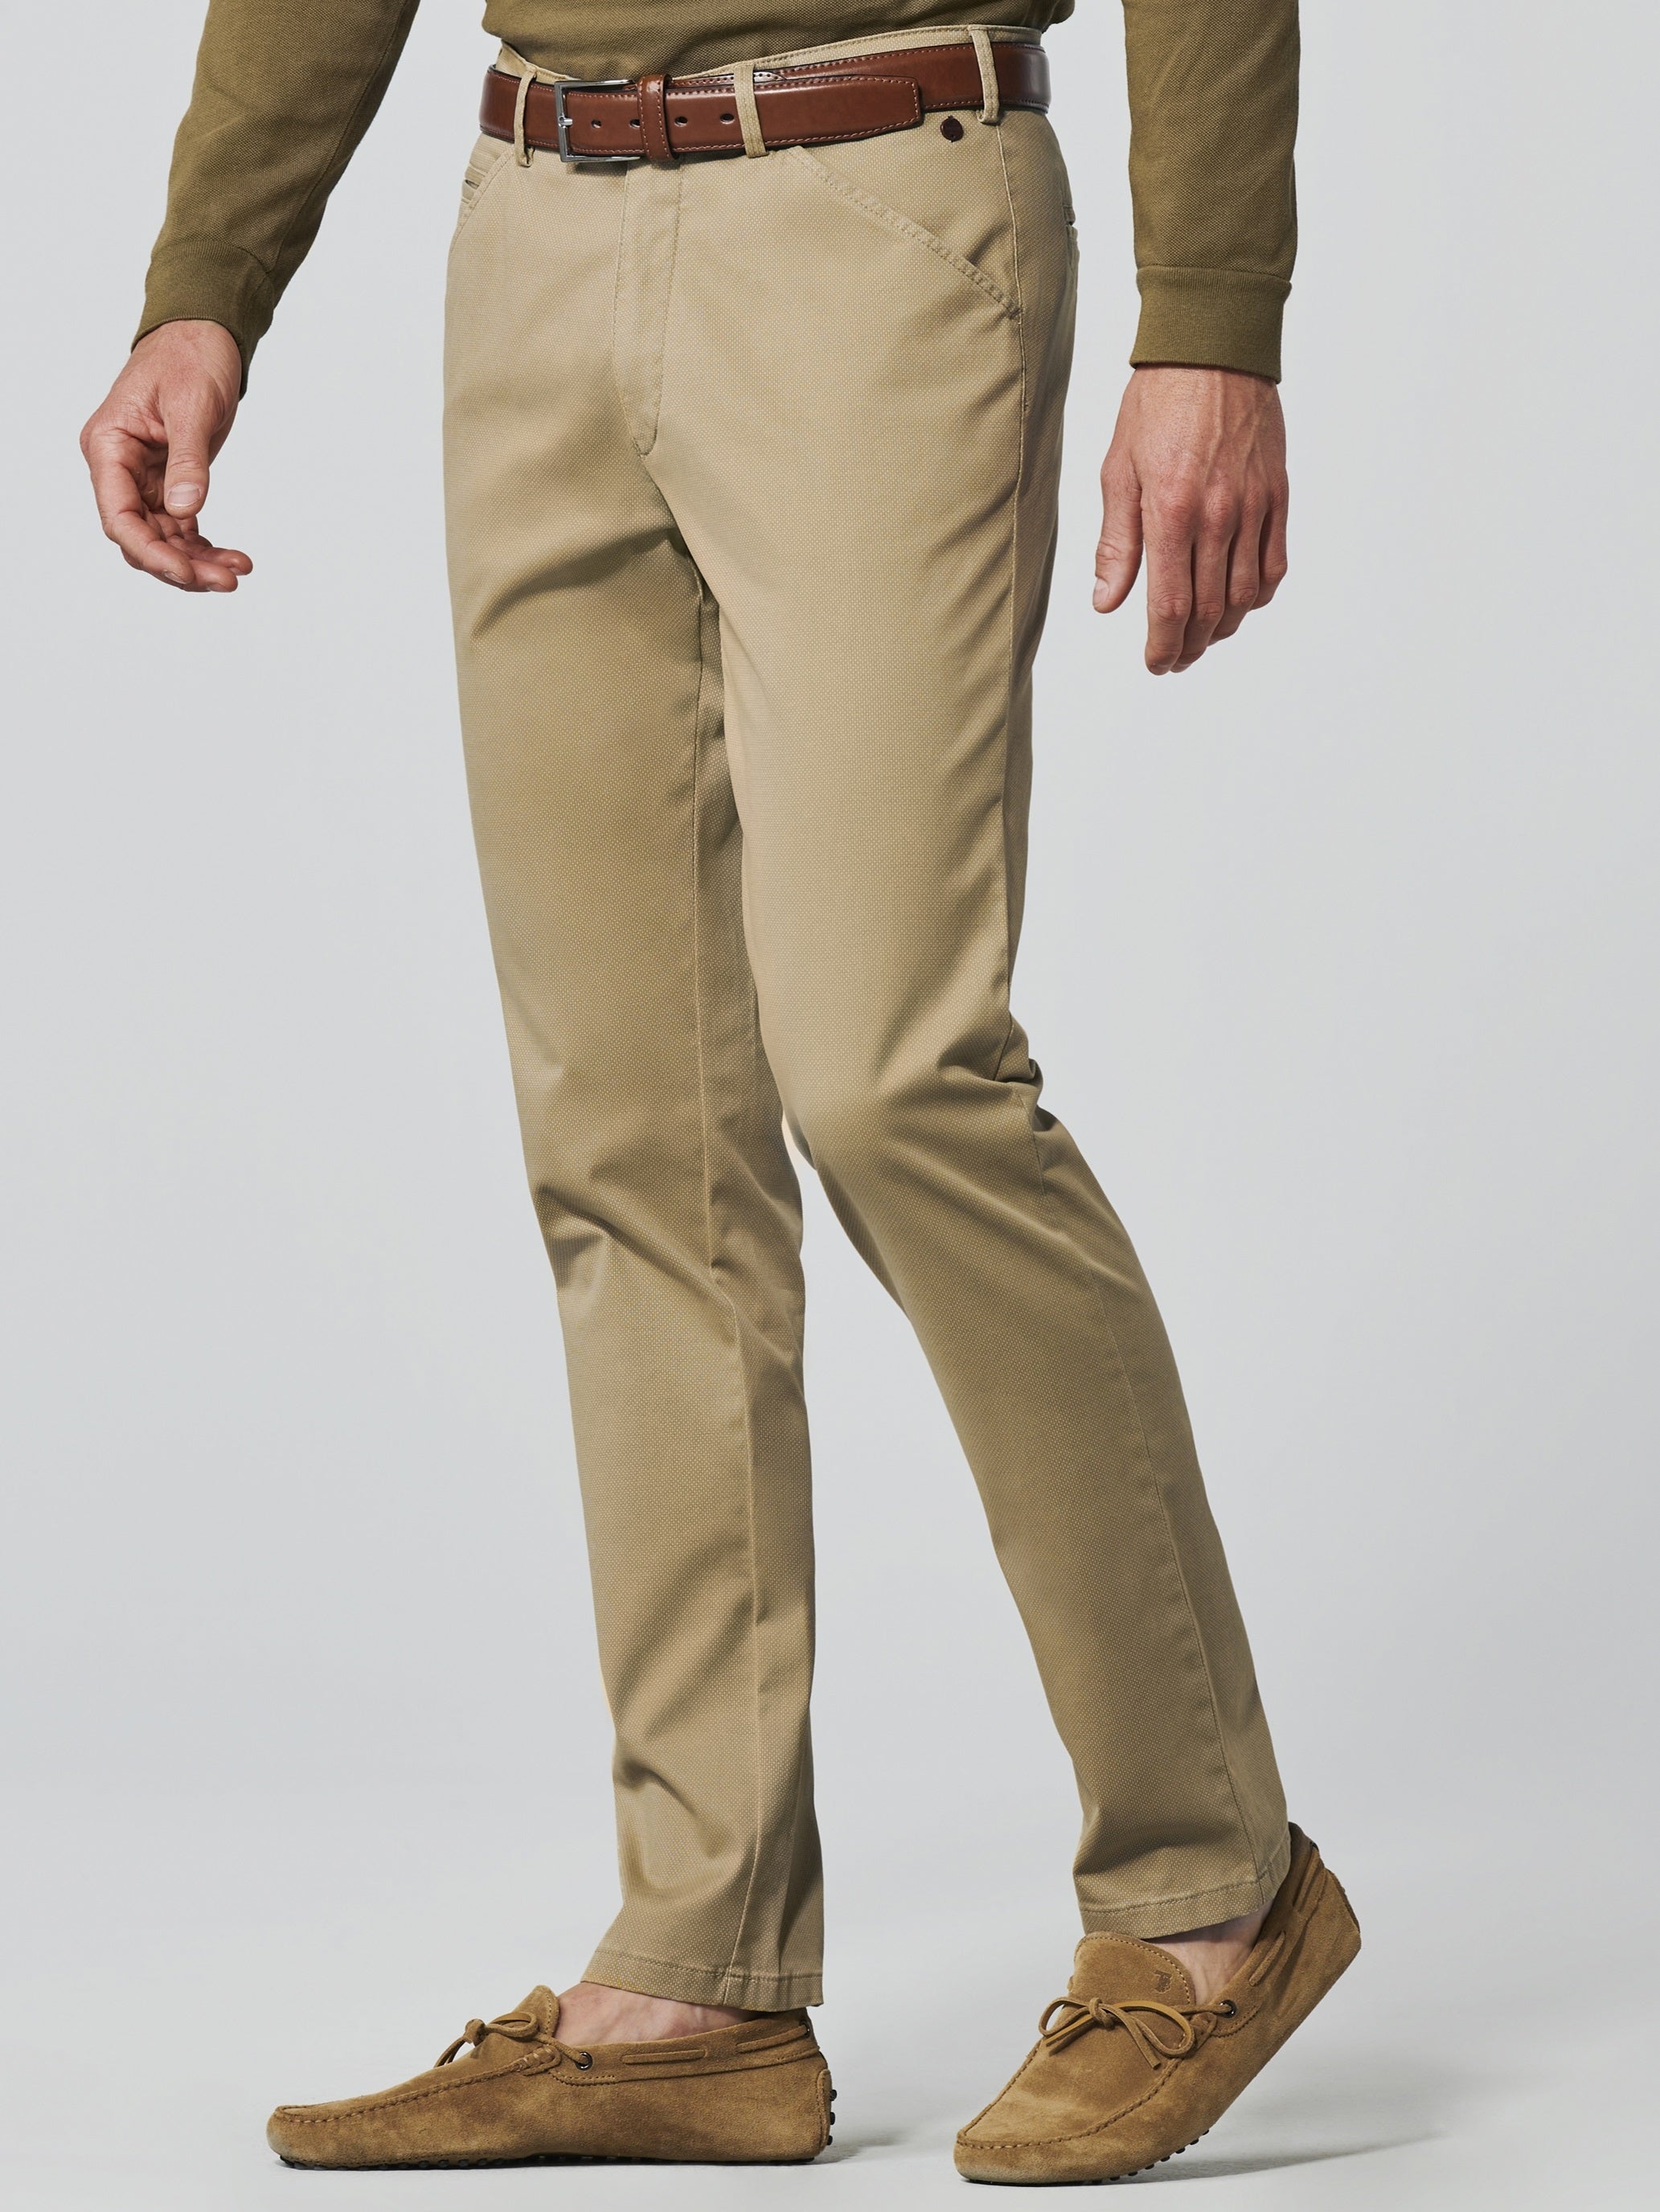 30% OFF - MEYER Chicago Trousers - 5056 Micro Print Cotton Chino - Sand - Sizes: 32 REG & 40 SHORT